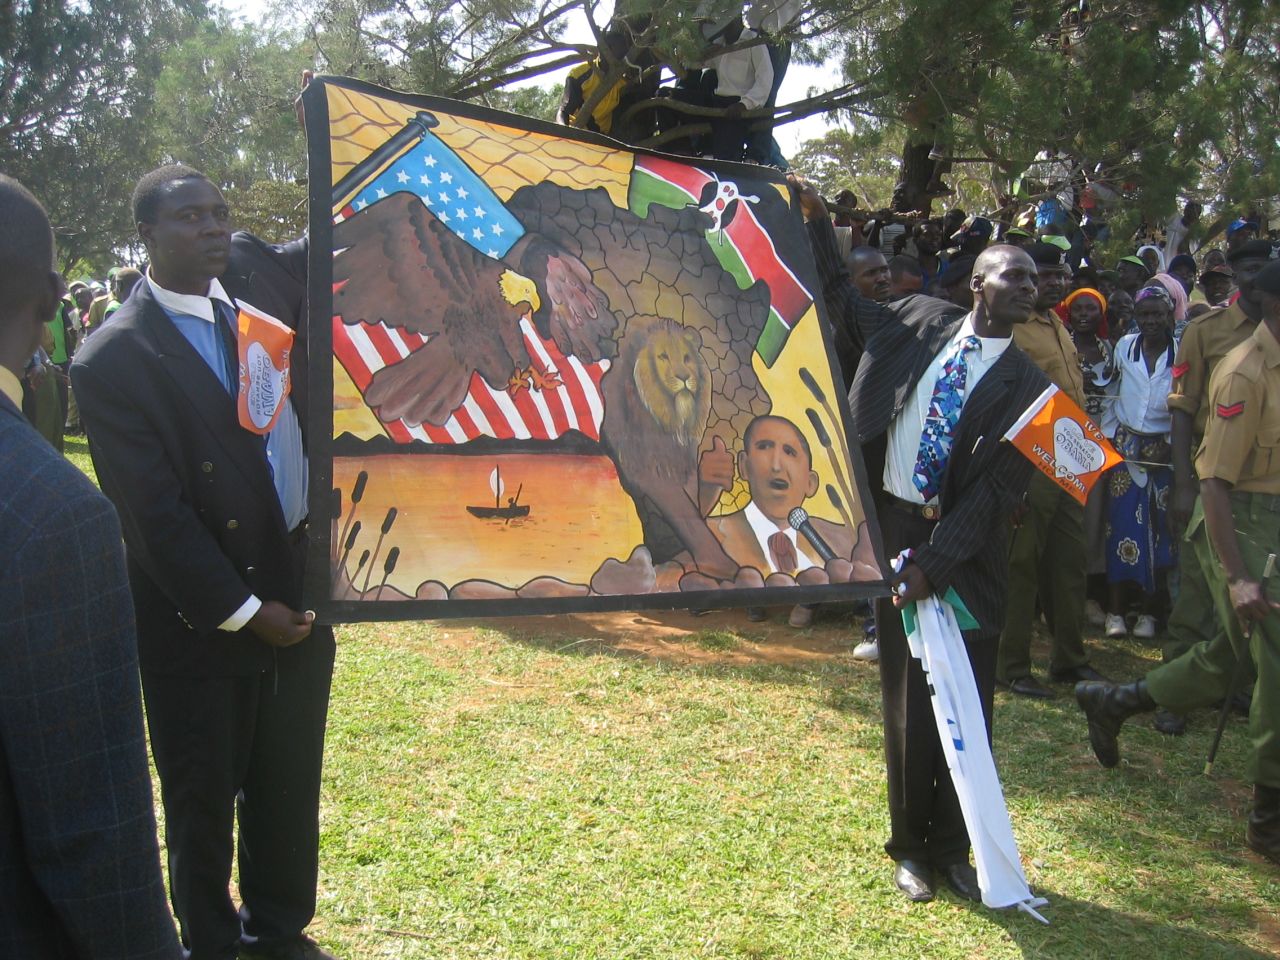 Large crowds gathered across Kenya to welcome Obama, who received too many gifts to bring home to the United States.